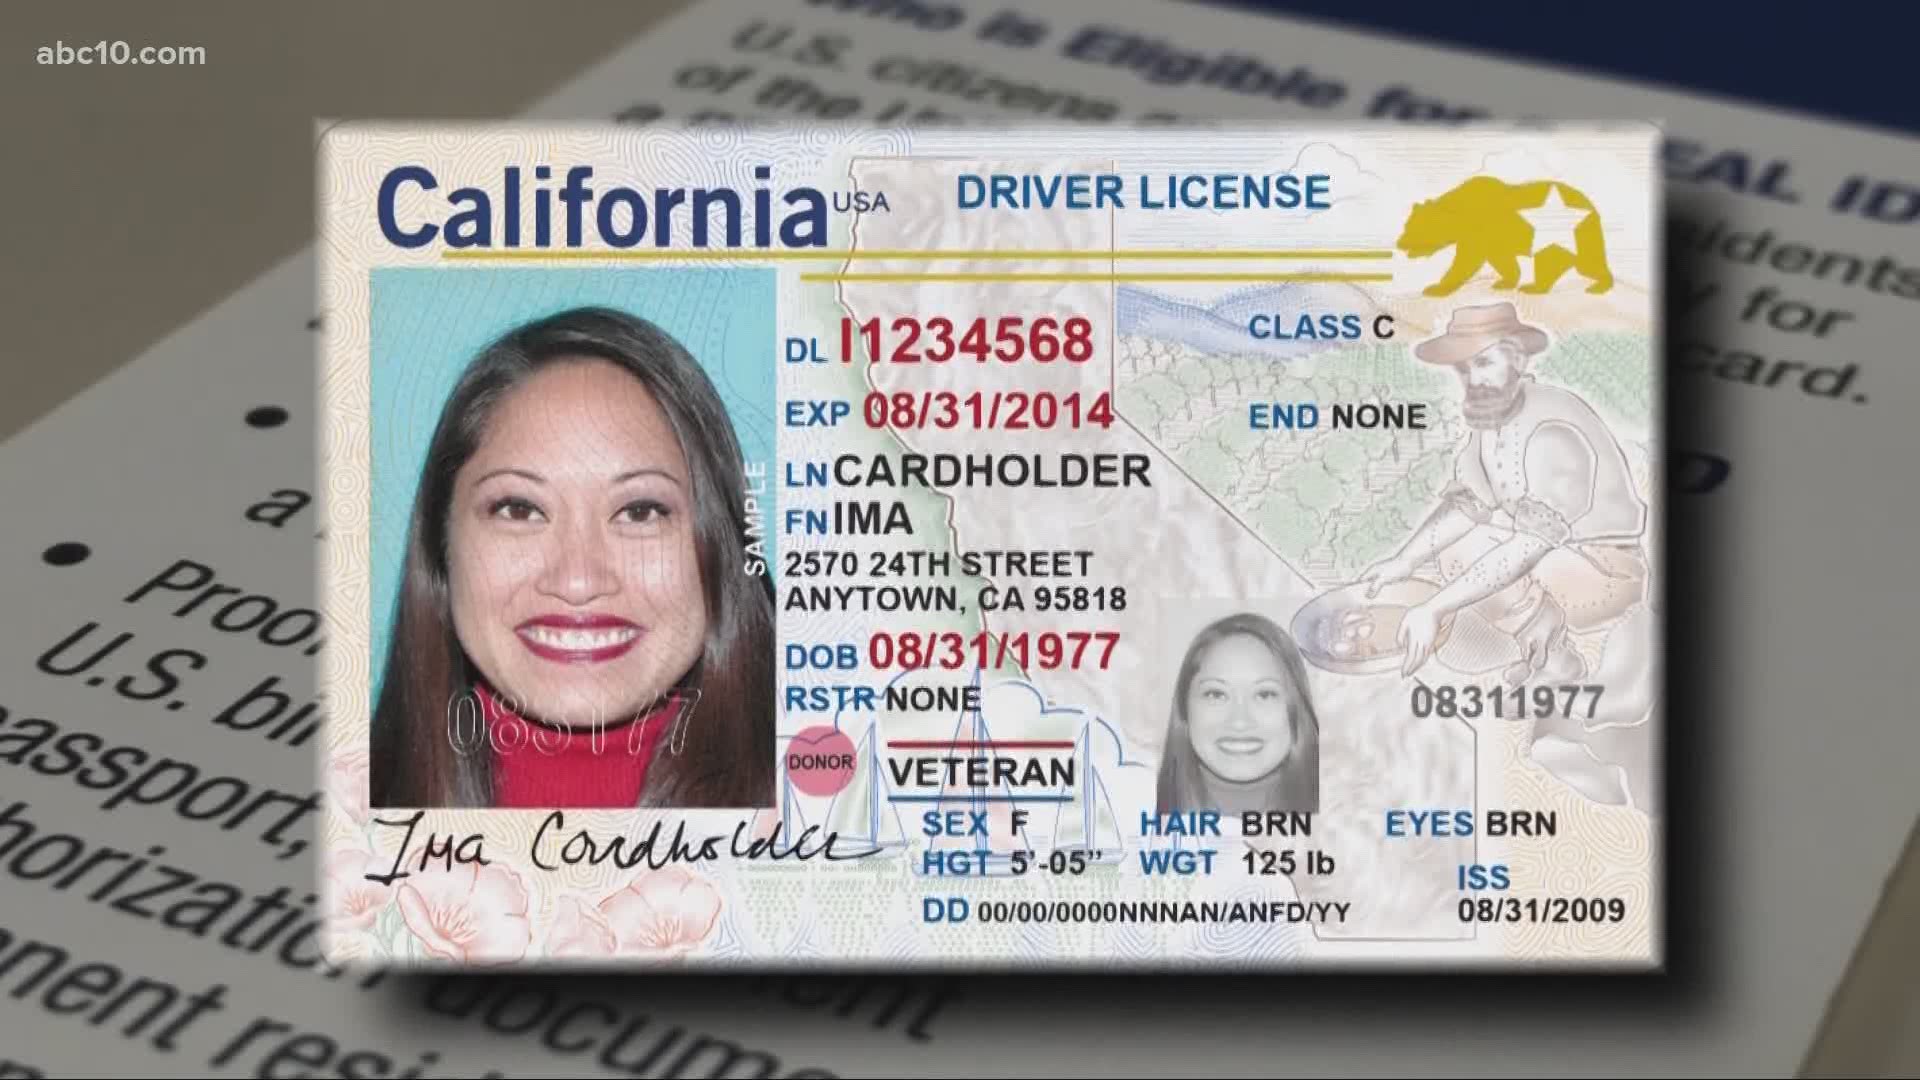 did not receive driver's license california